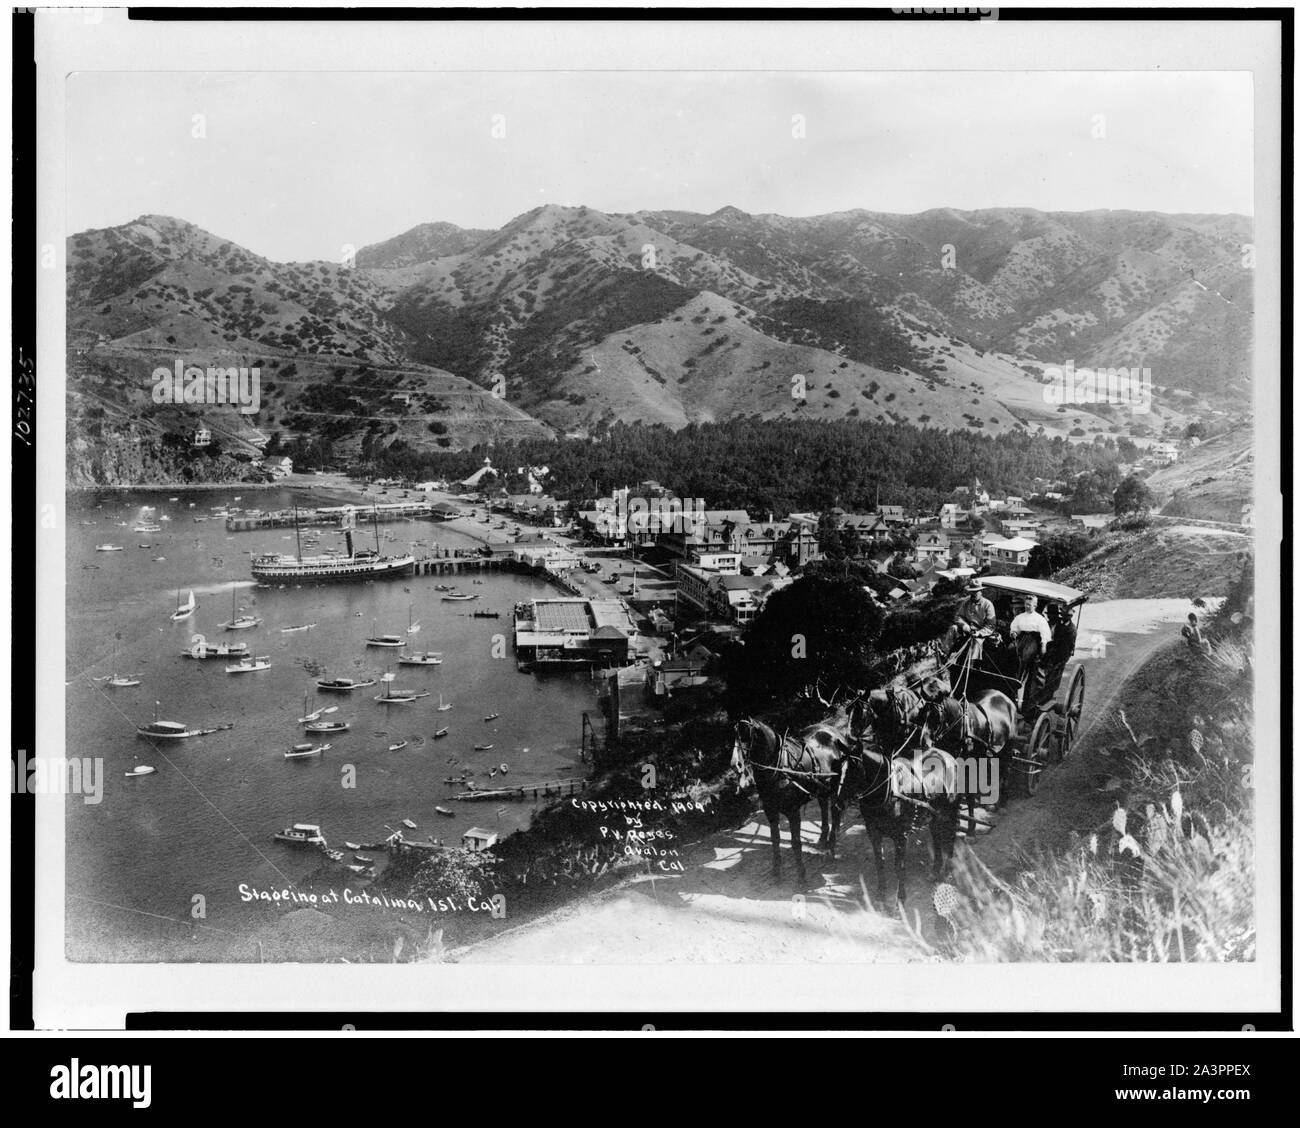 Staging bei Catalina Isl., Cal. Stockfoto